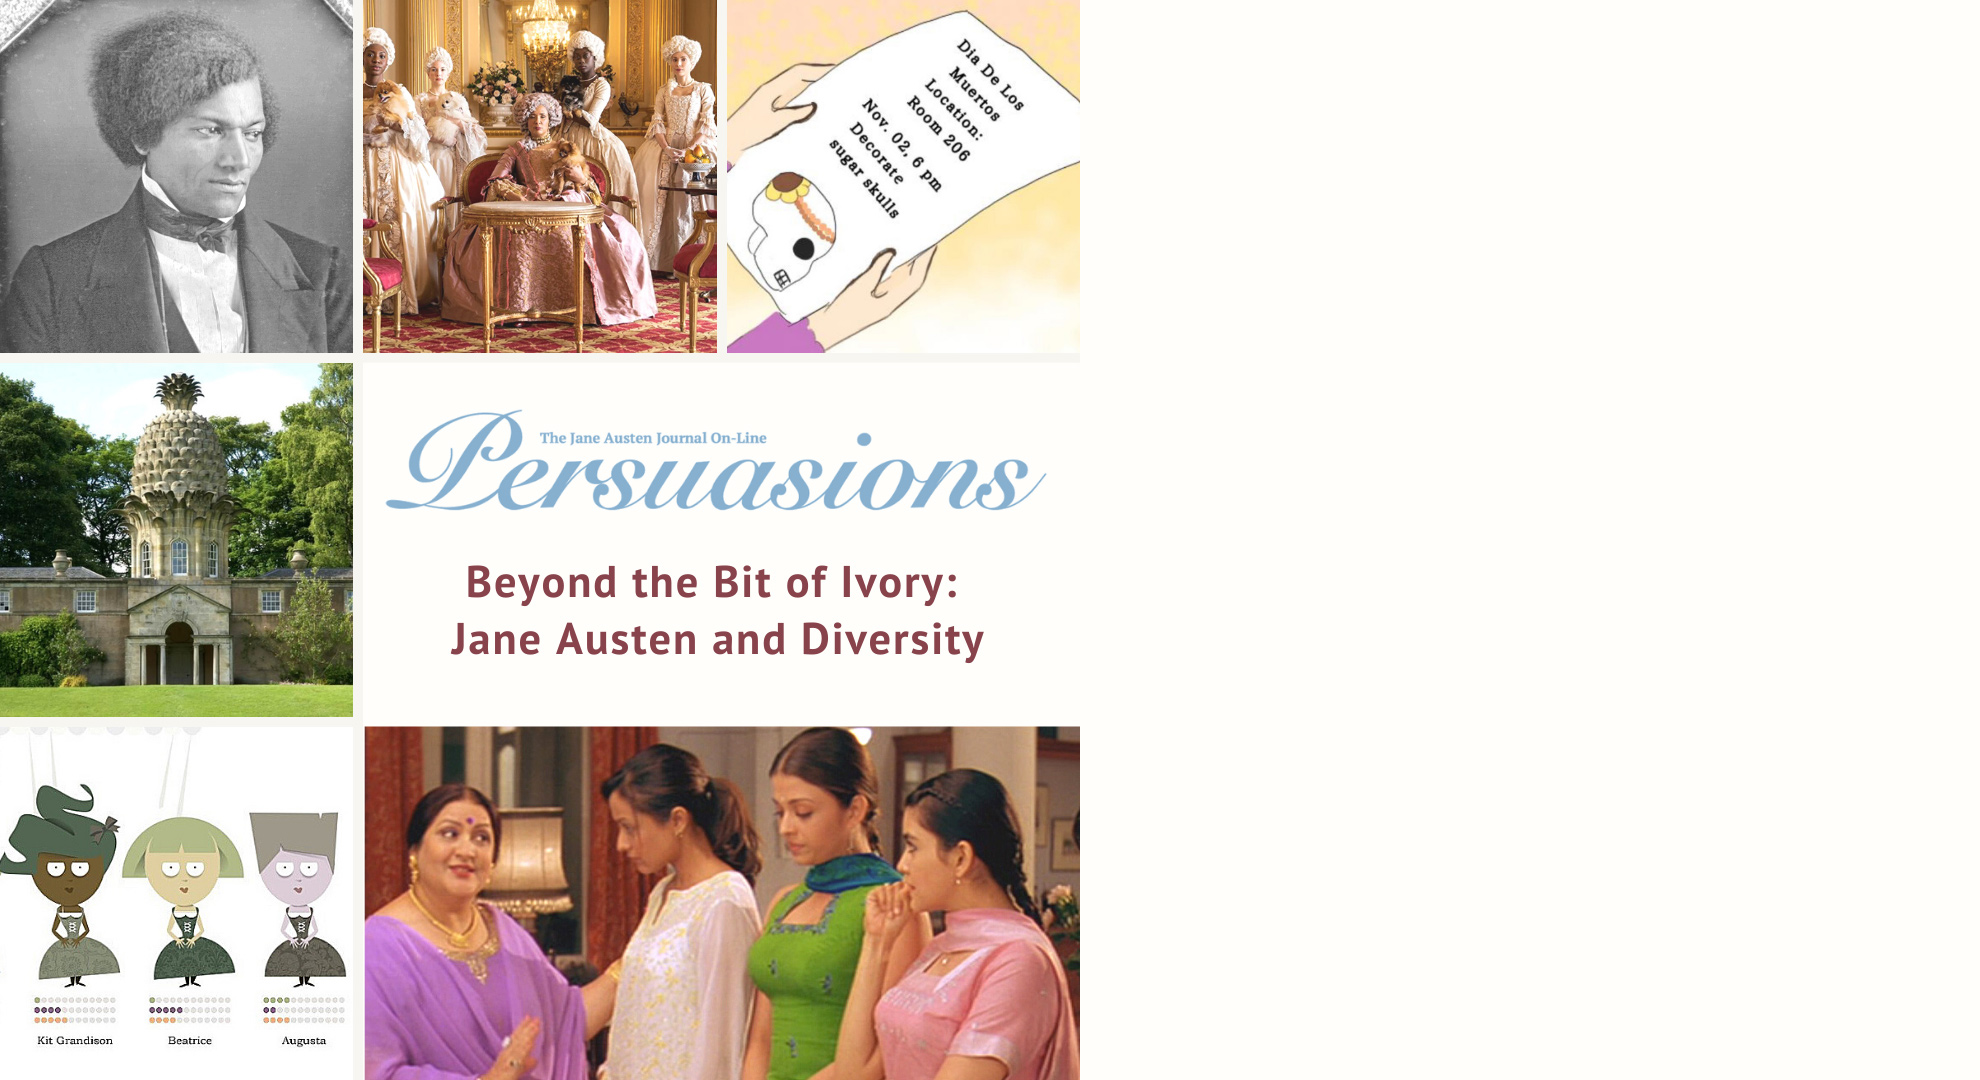 Jane Austen and Diversity: Special Issue of <i>Persuasions On-Line</i> Released